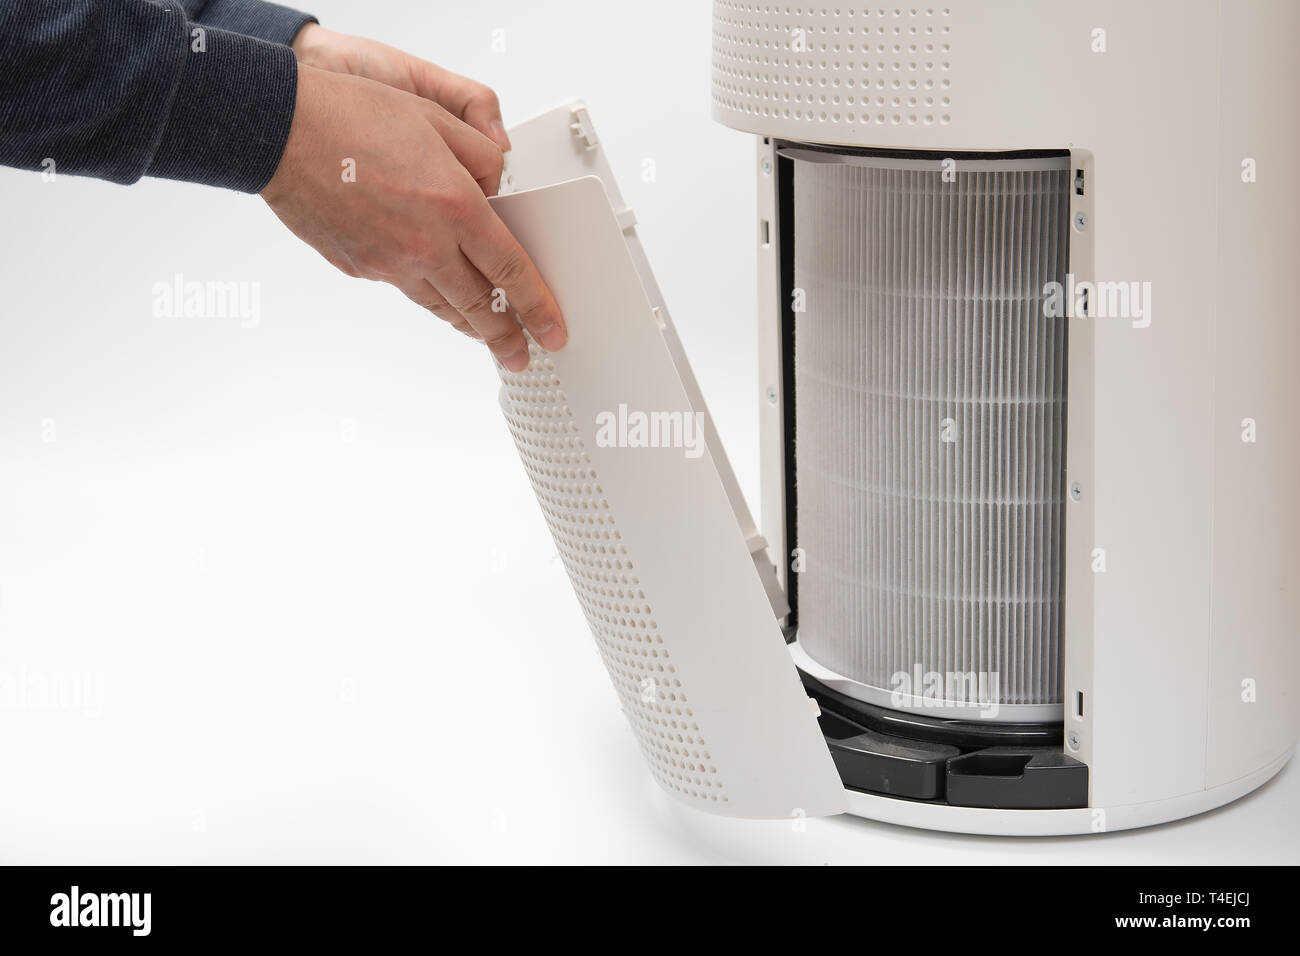 A man's hand turning an air purifier's filter into a new one. Stock Photo